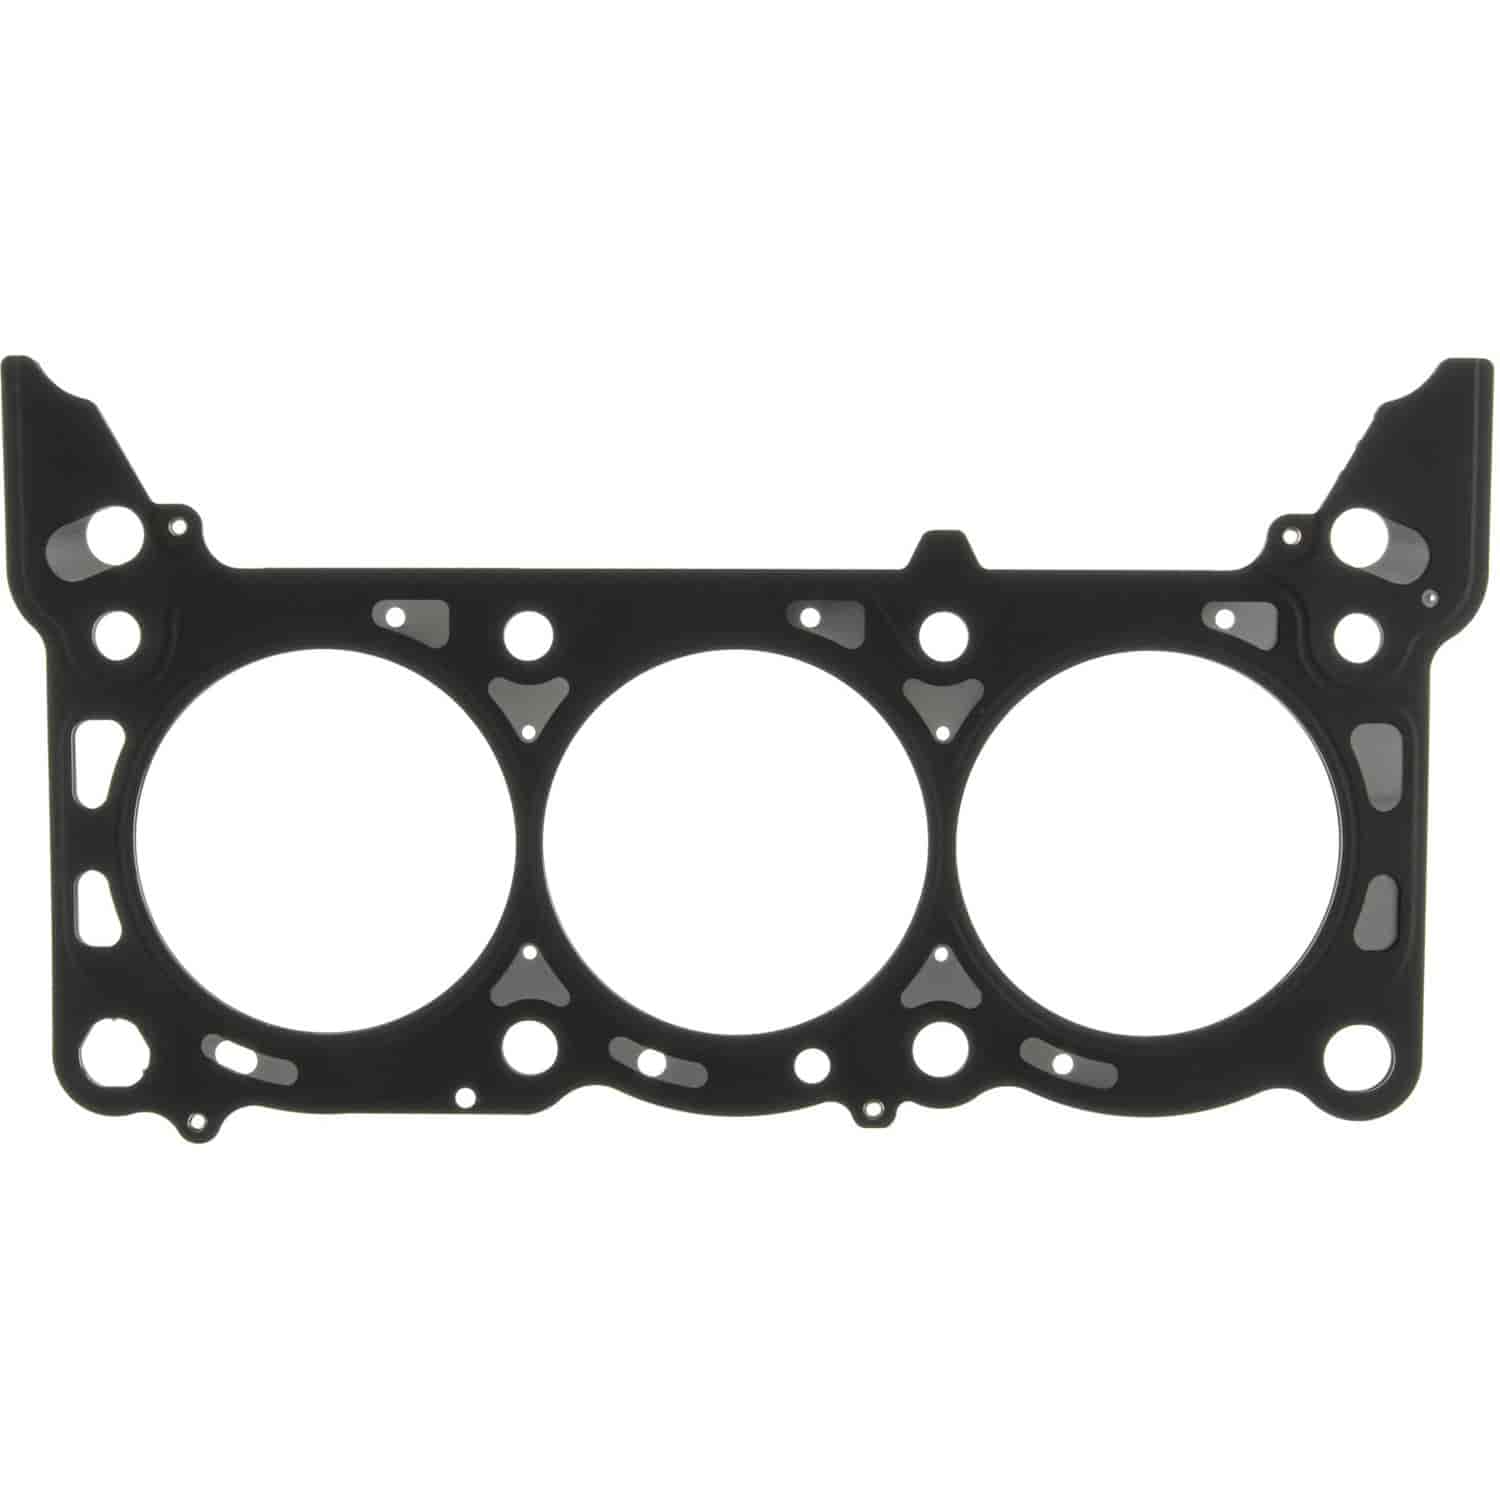 Cylinder Head Gasket Left Ford Products V6 3.8L 1997-98 Mustang 1997 T-Bird & Cougar LH .